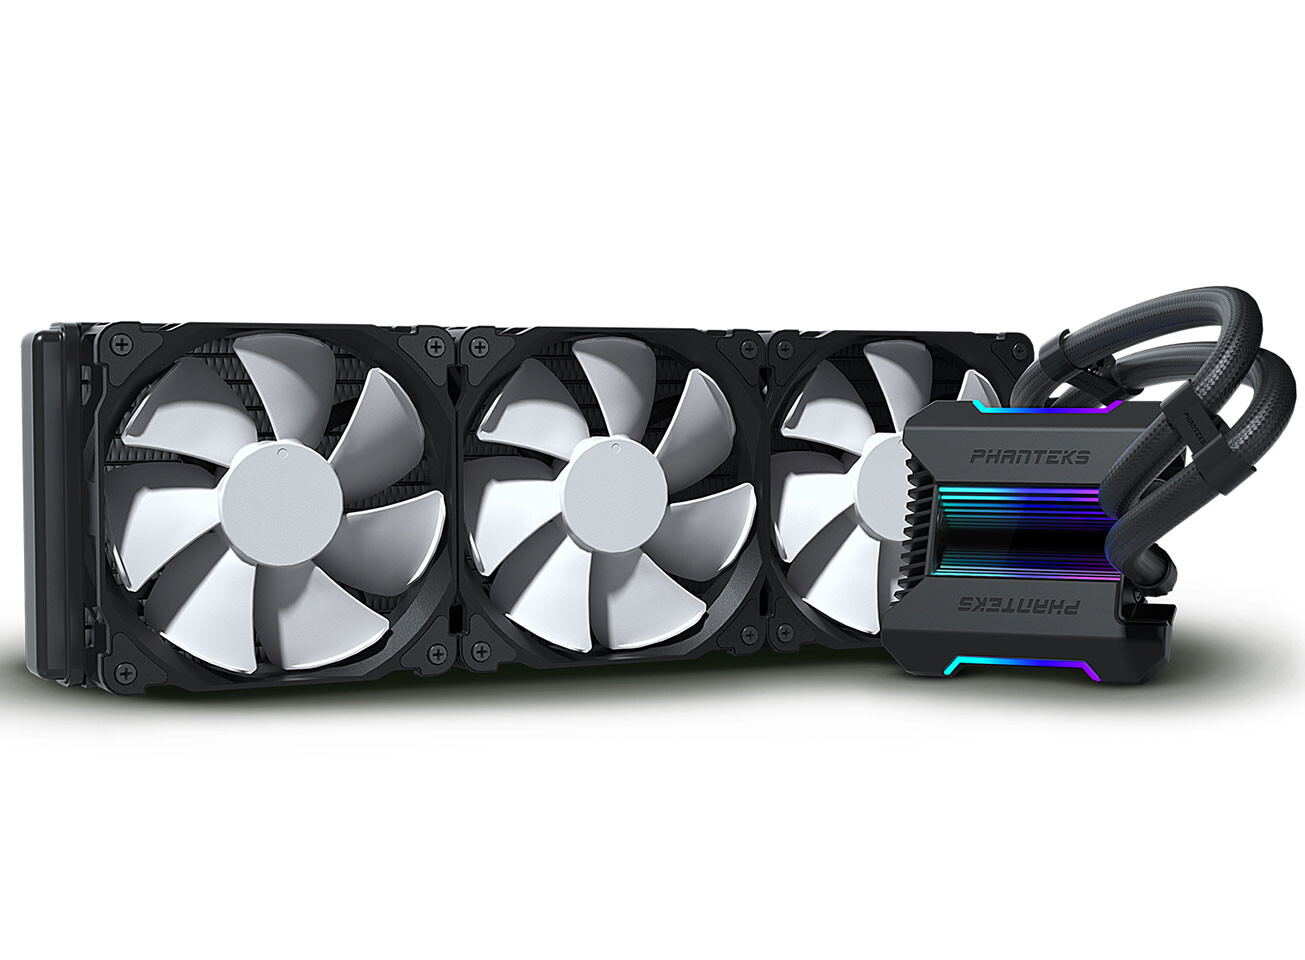 Phanteks Announces Glacier One All-in-One Liquid CPU Coolers